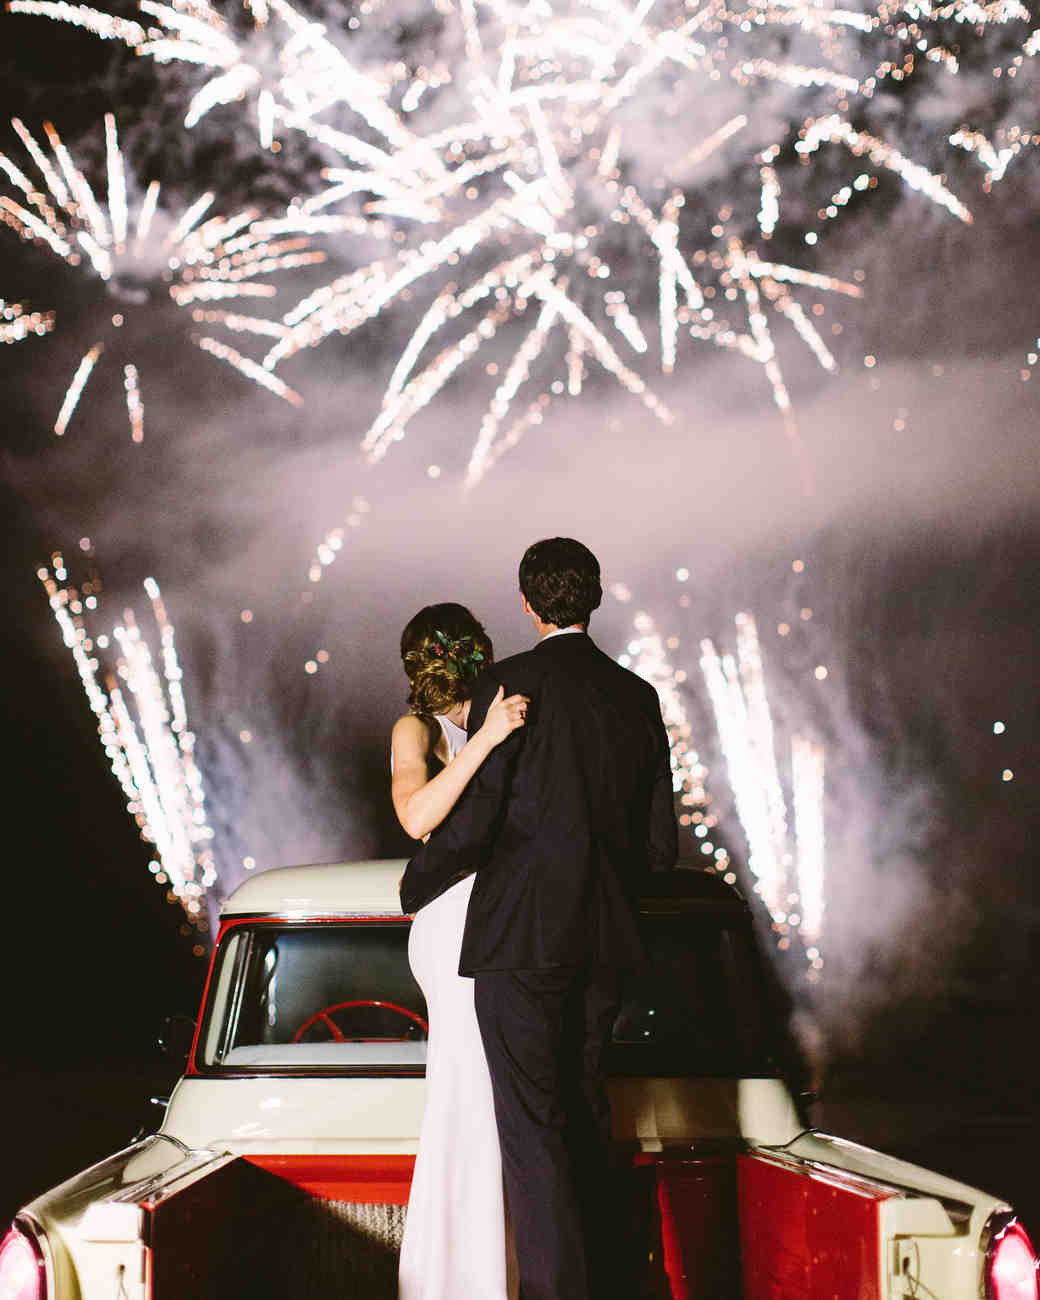 Firework Sparklers Wedding
 Amazing Fireworks and Sparklers from Real Weddings